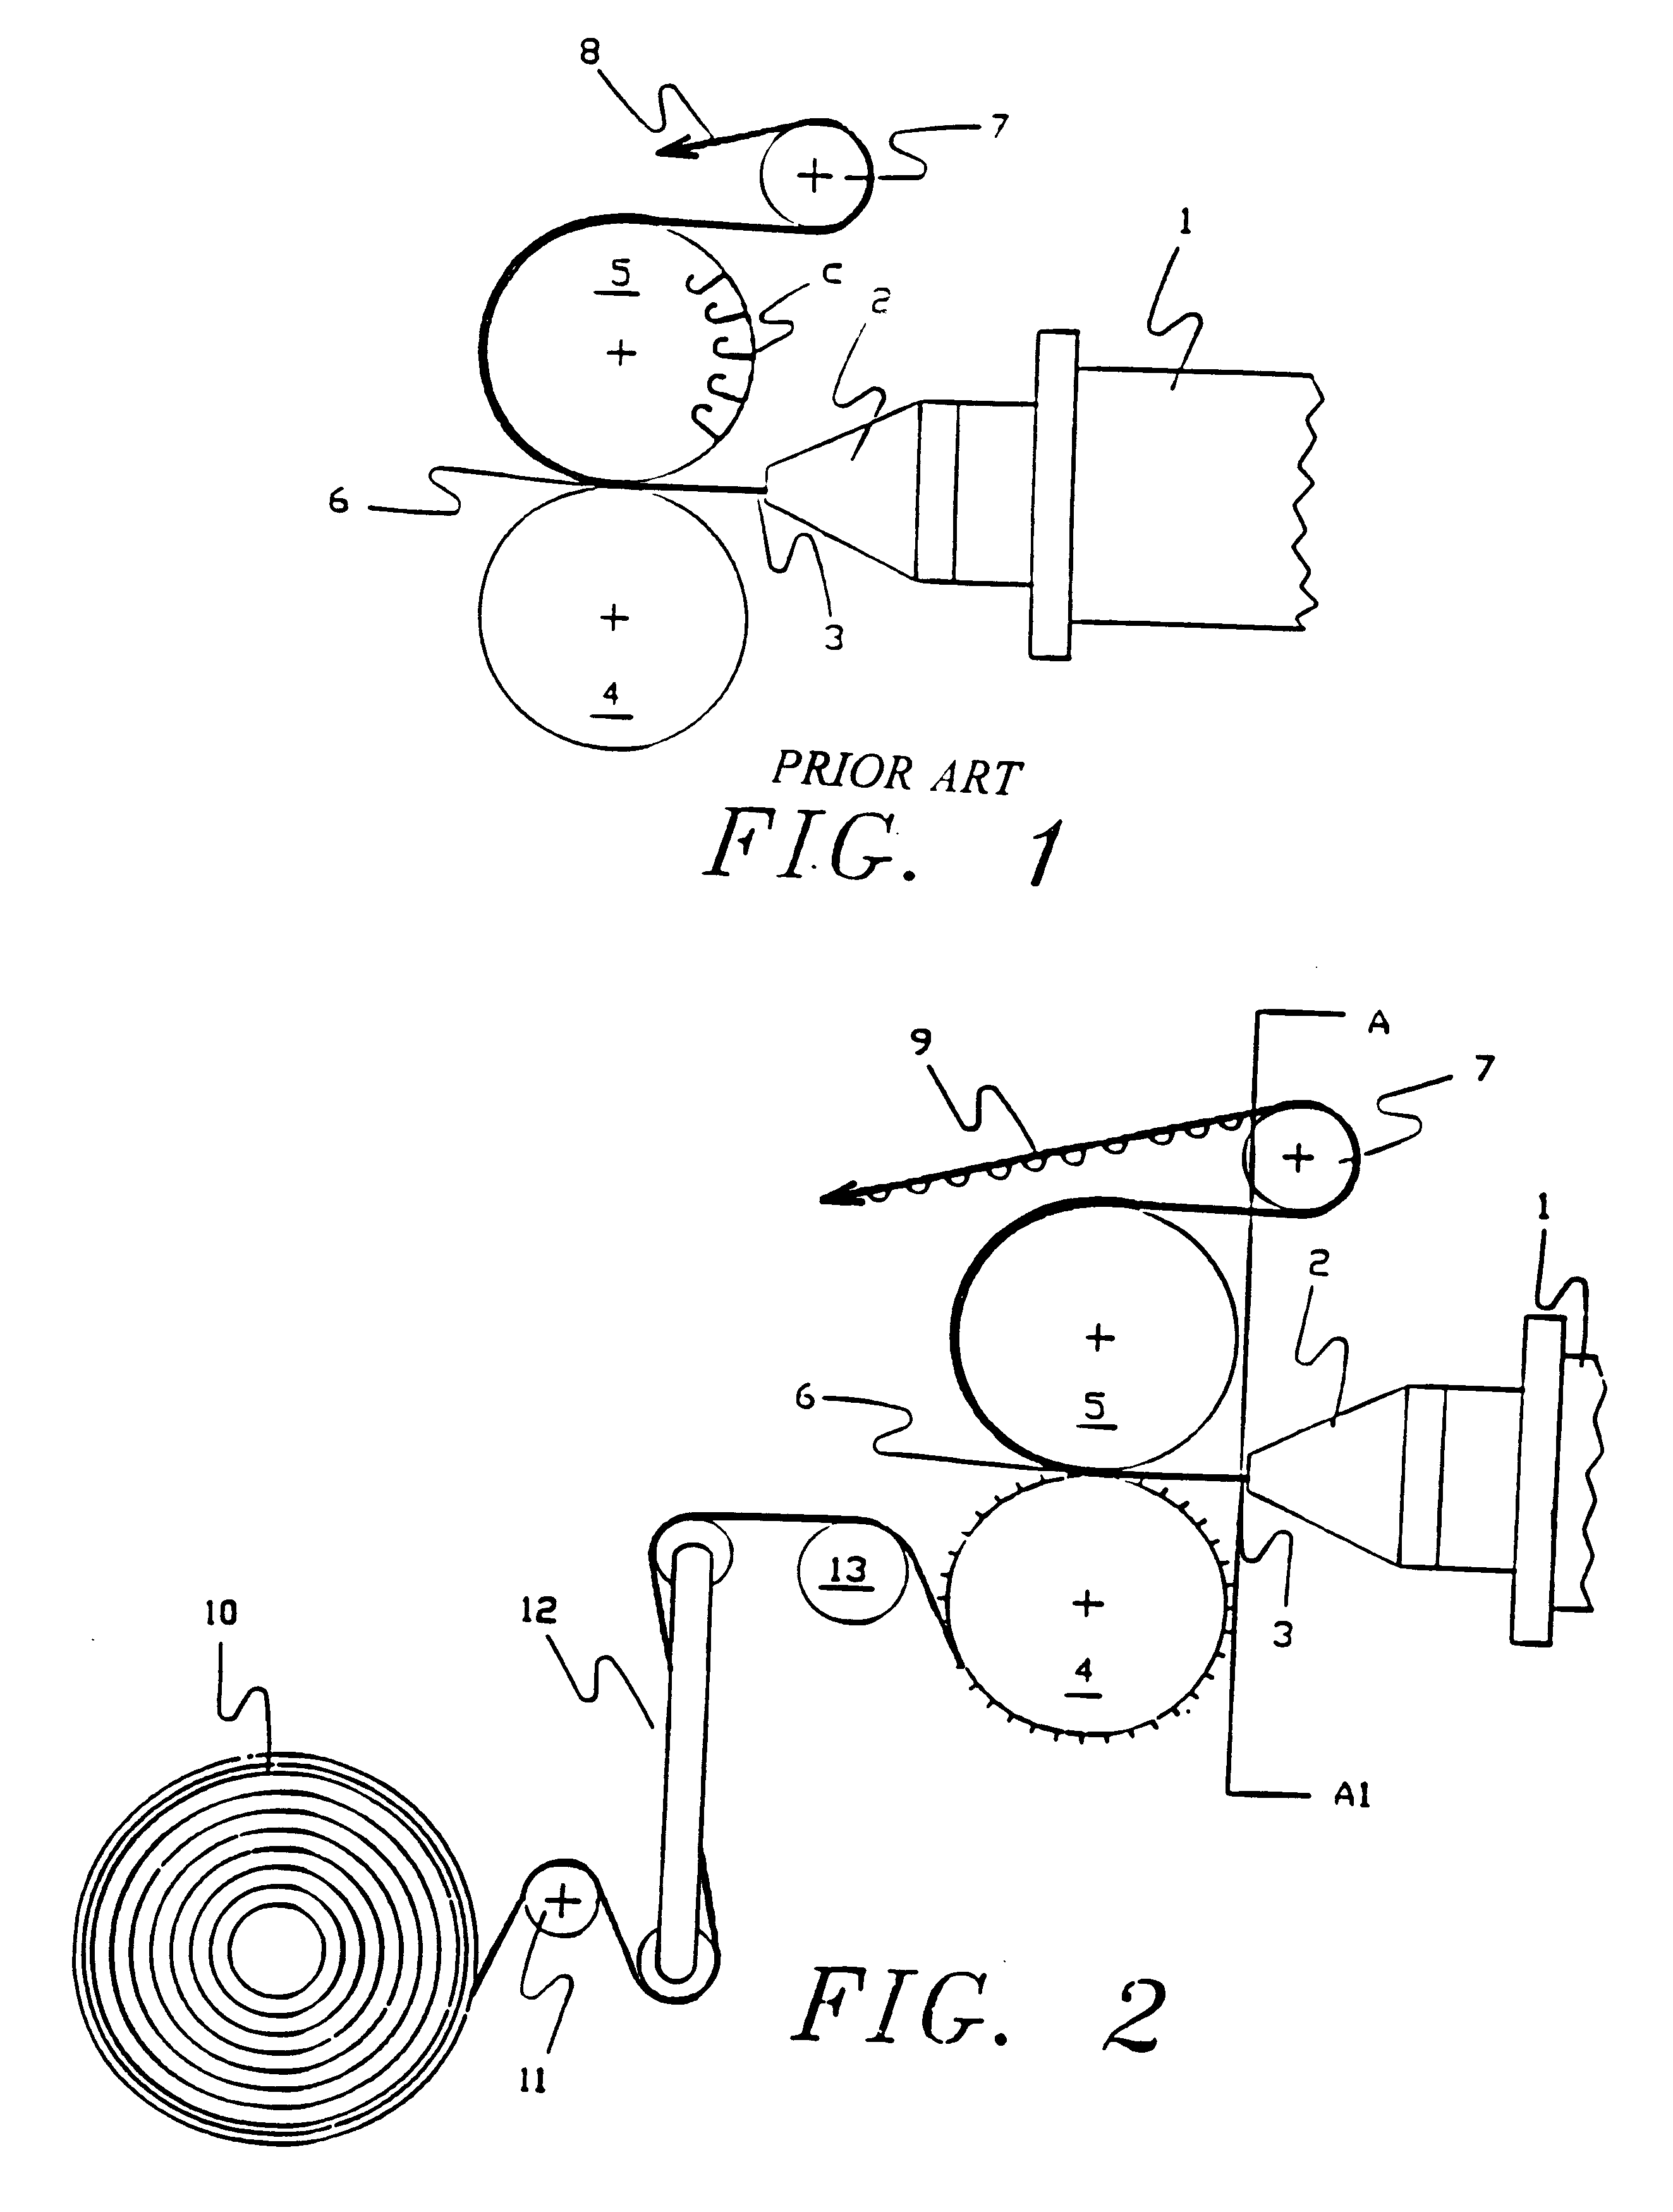 Molding fastener products having backings